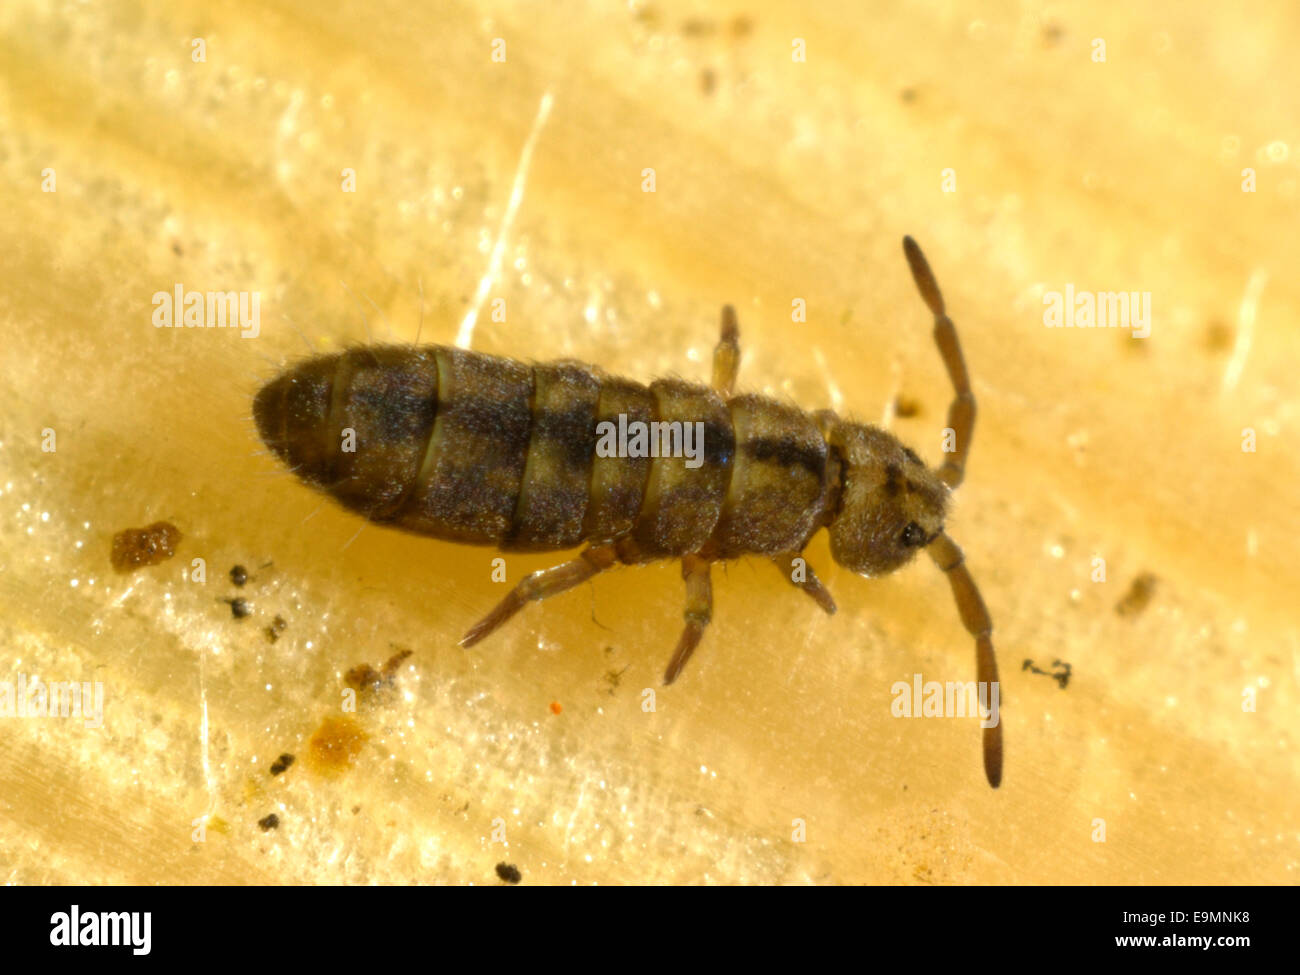 A marsh springtail, Isotomurus palustris, on a water lily pad Stock Photo